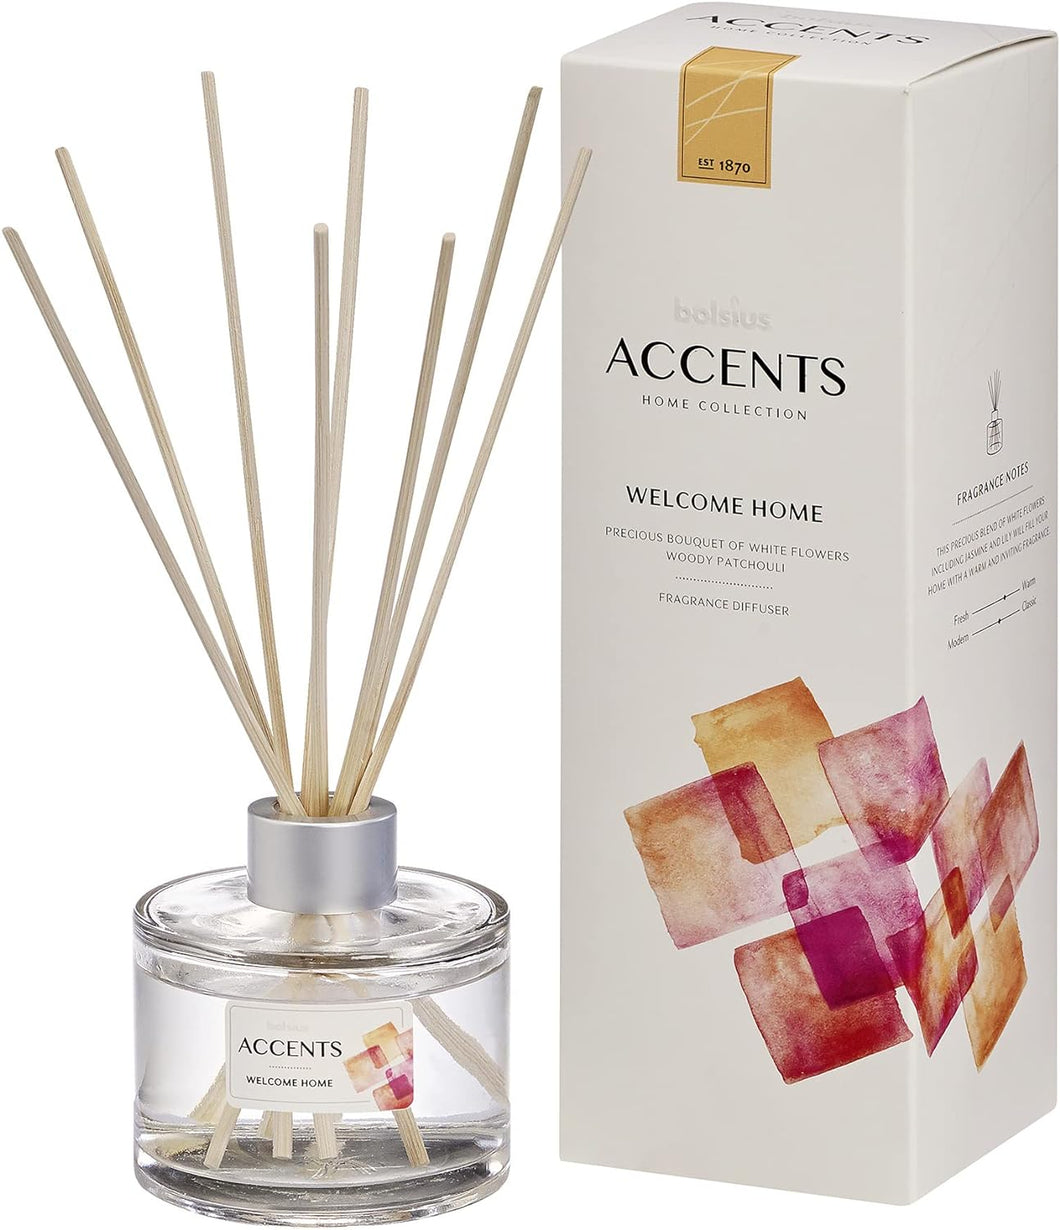 Bolsius Accents Fragrance Diffuser, Welcome Home – 100ml